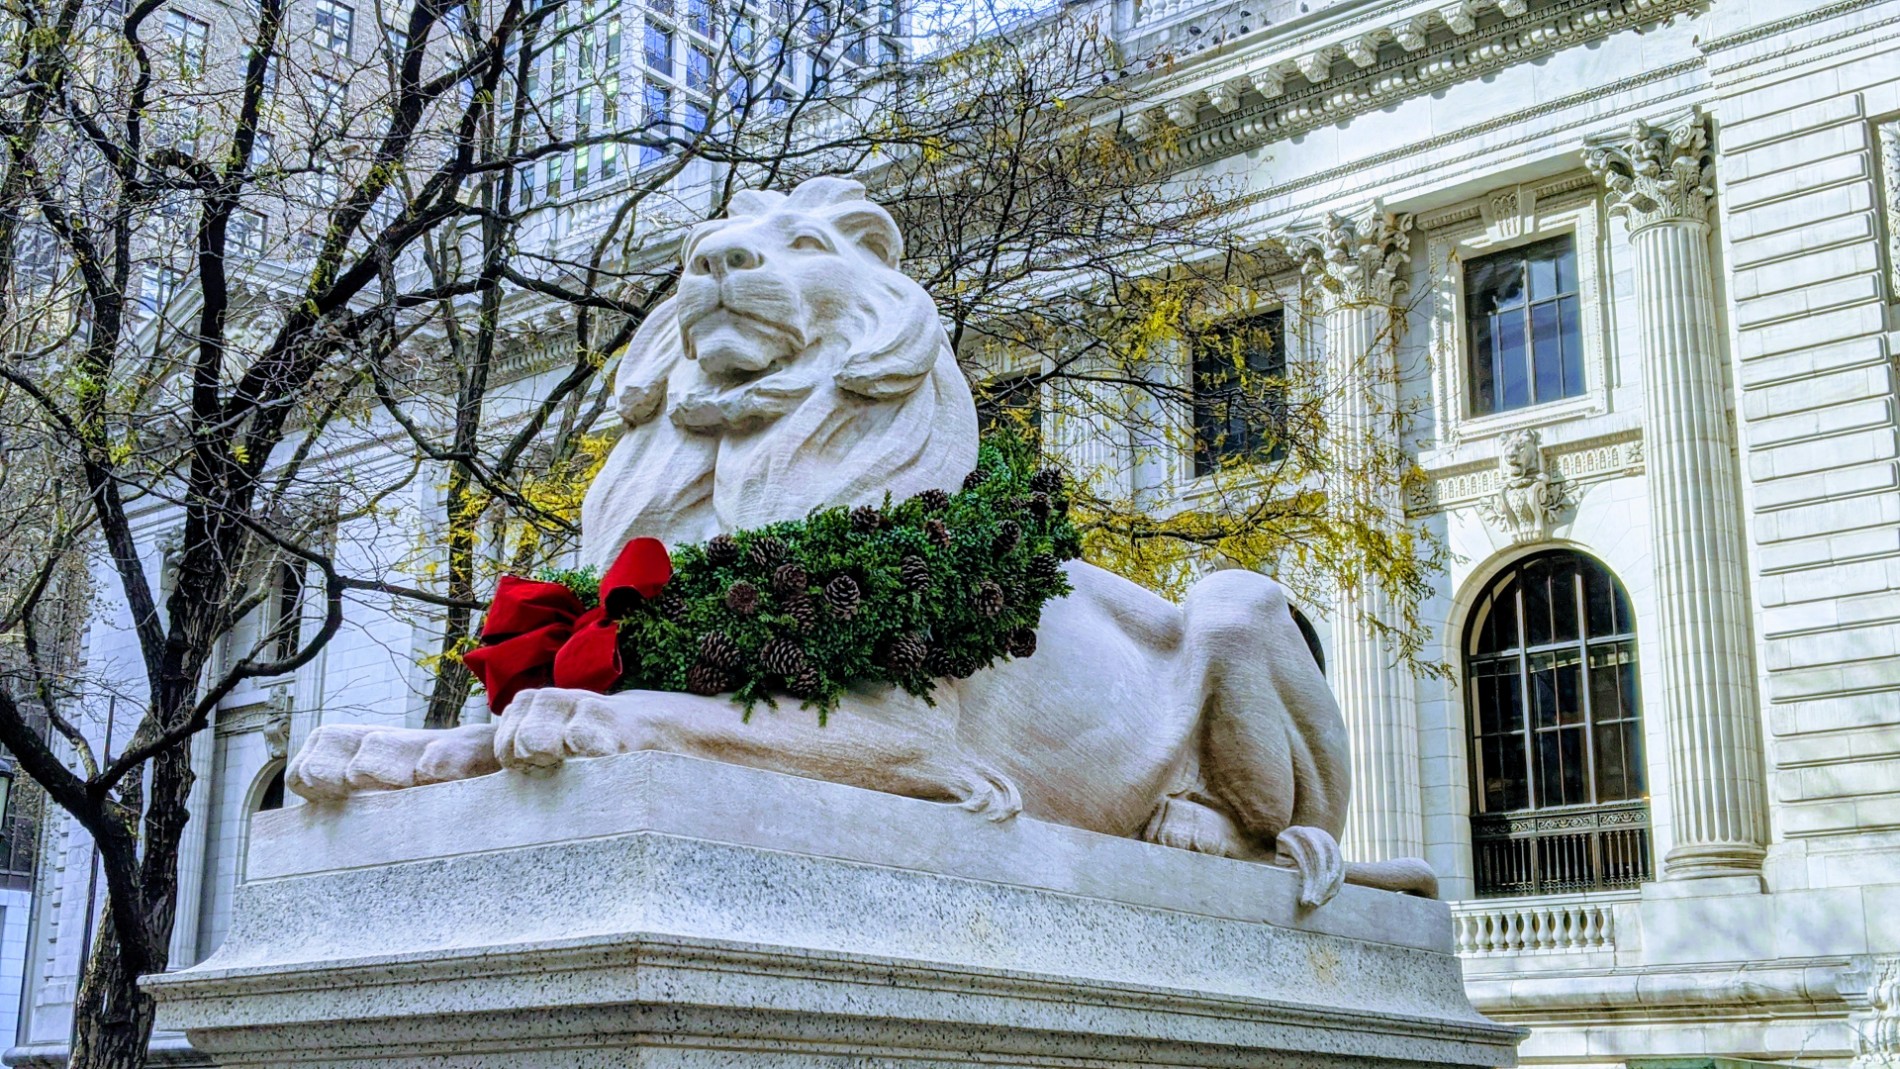 One of the lion statues flanking the New York Public Library